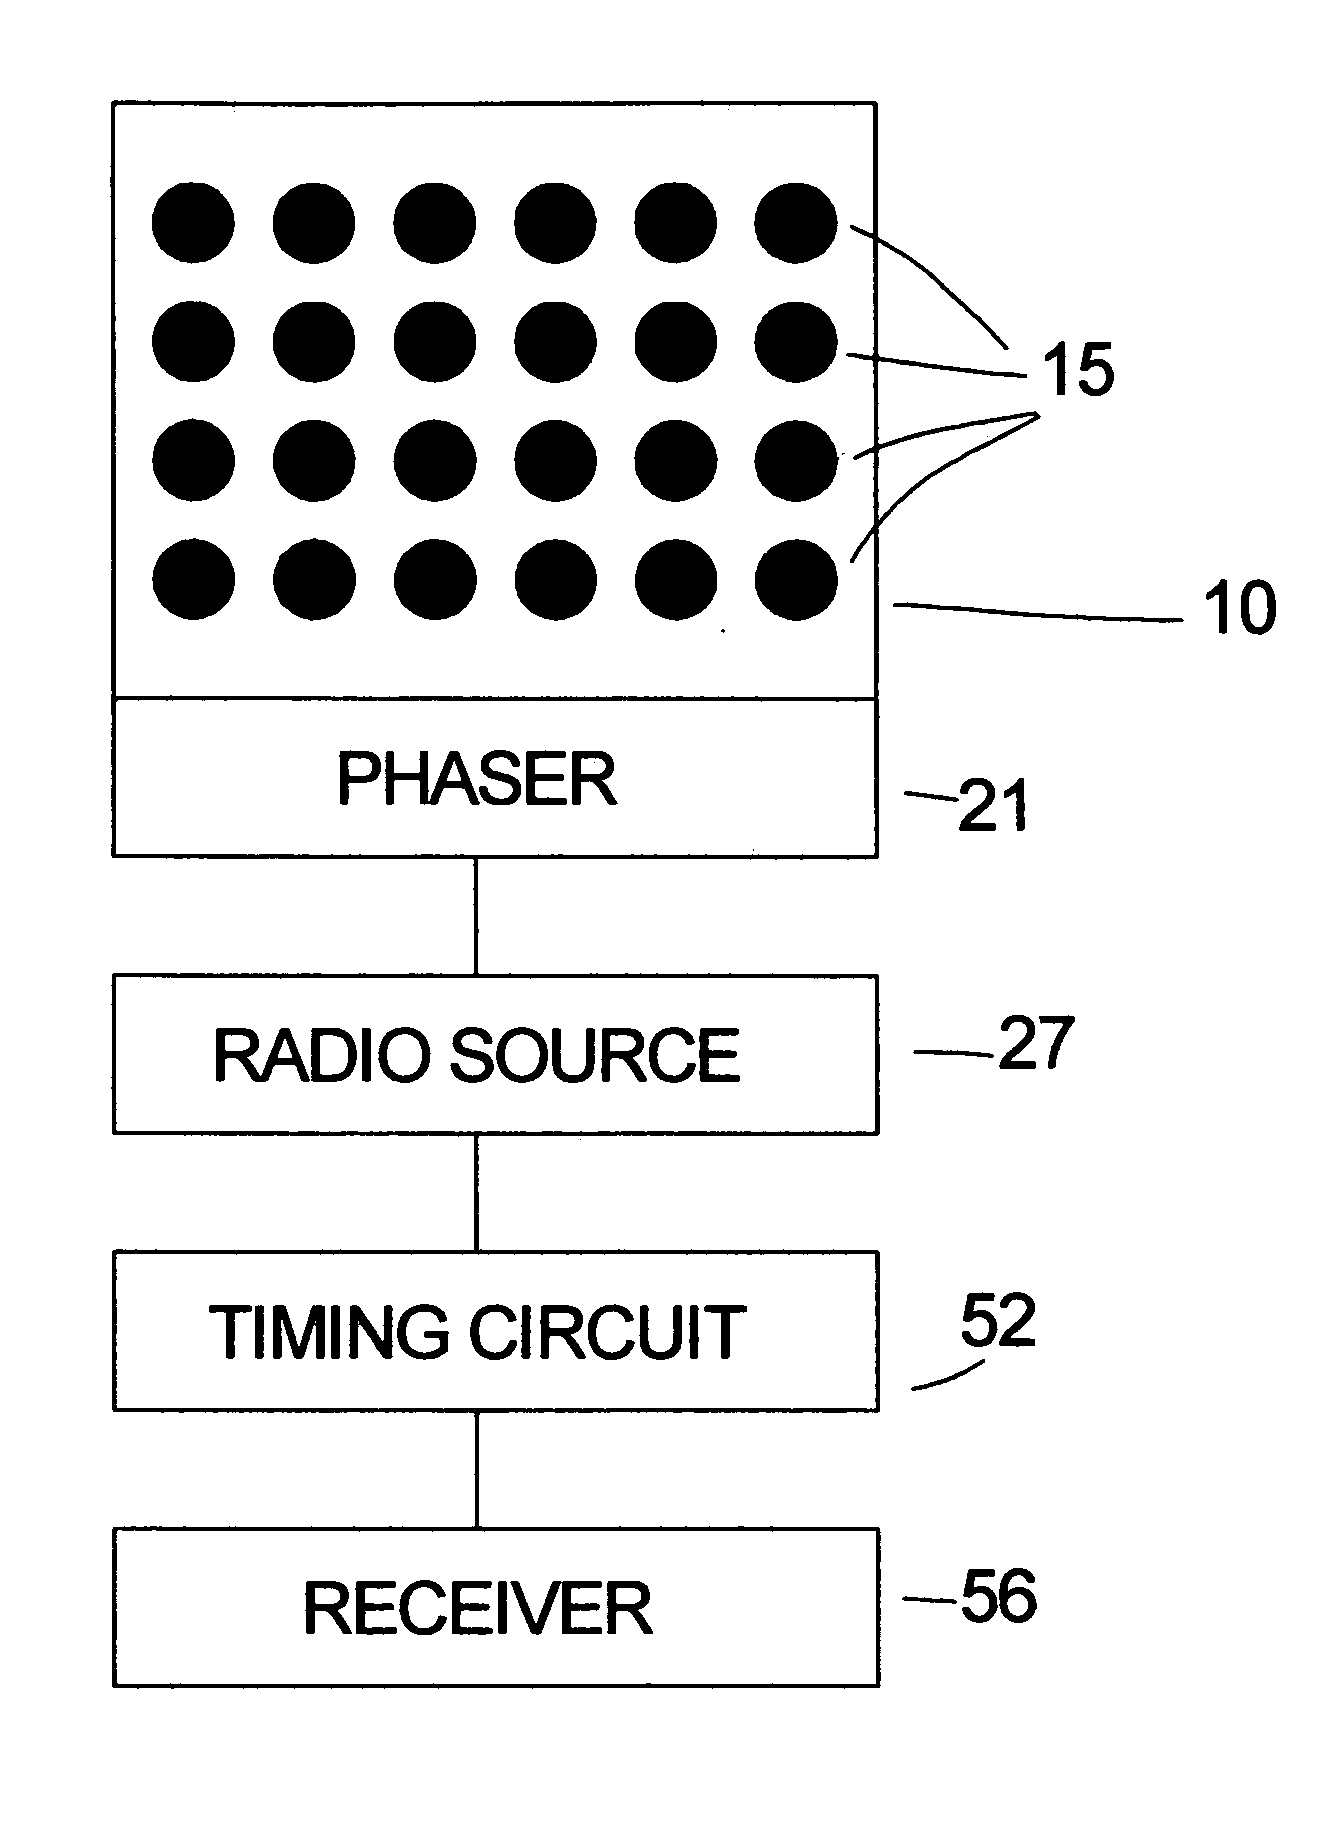 System for the relative navigation of aircraft and spacecraft using a phased array antenna